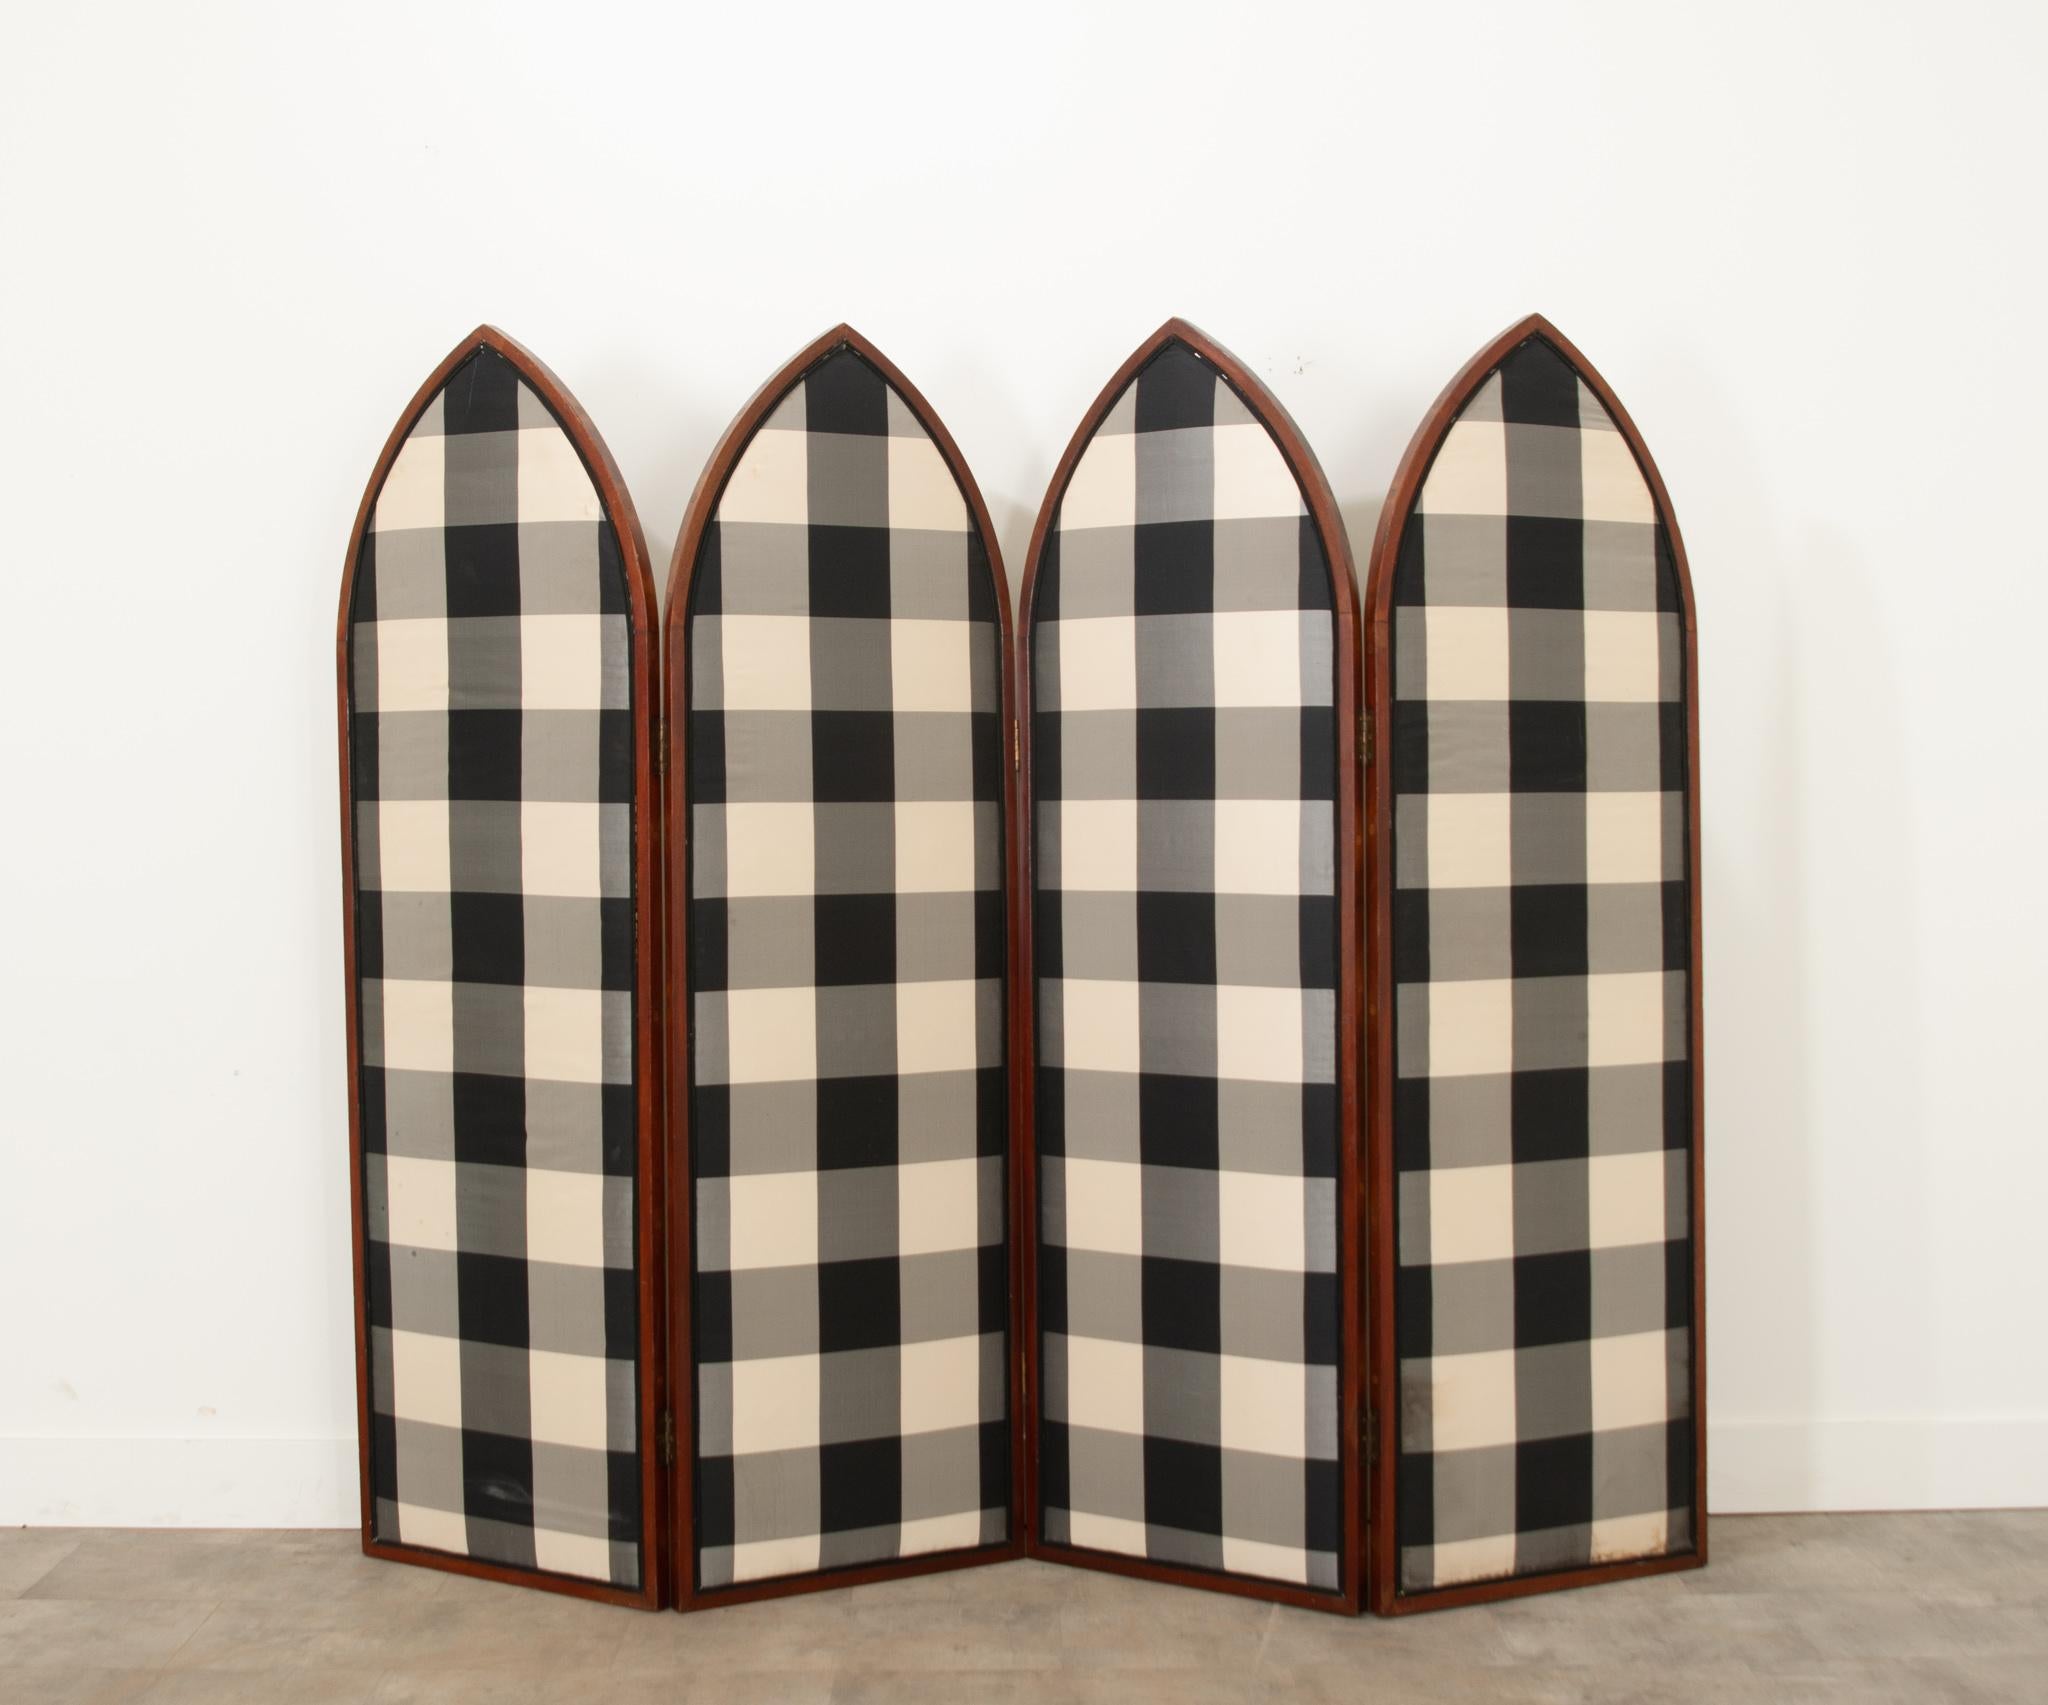 This Gothic style mahogany and silk upholstered room divider from 19th century France is an amazing functional decor piece. Each panel measures 22-?” wide and is seamlessly fixed with black, white, and gray checkered fabric with a double welt